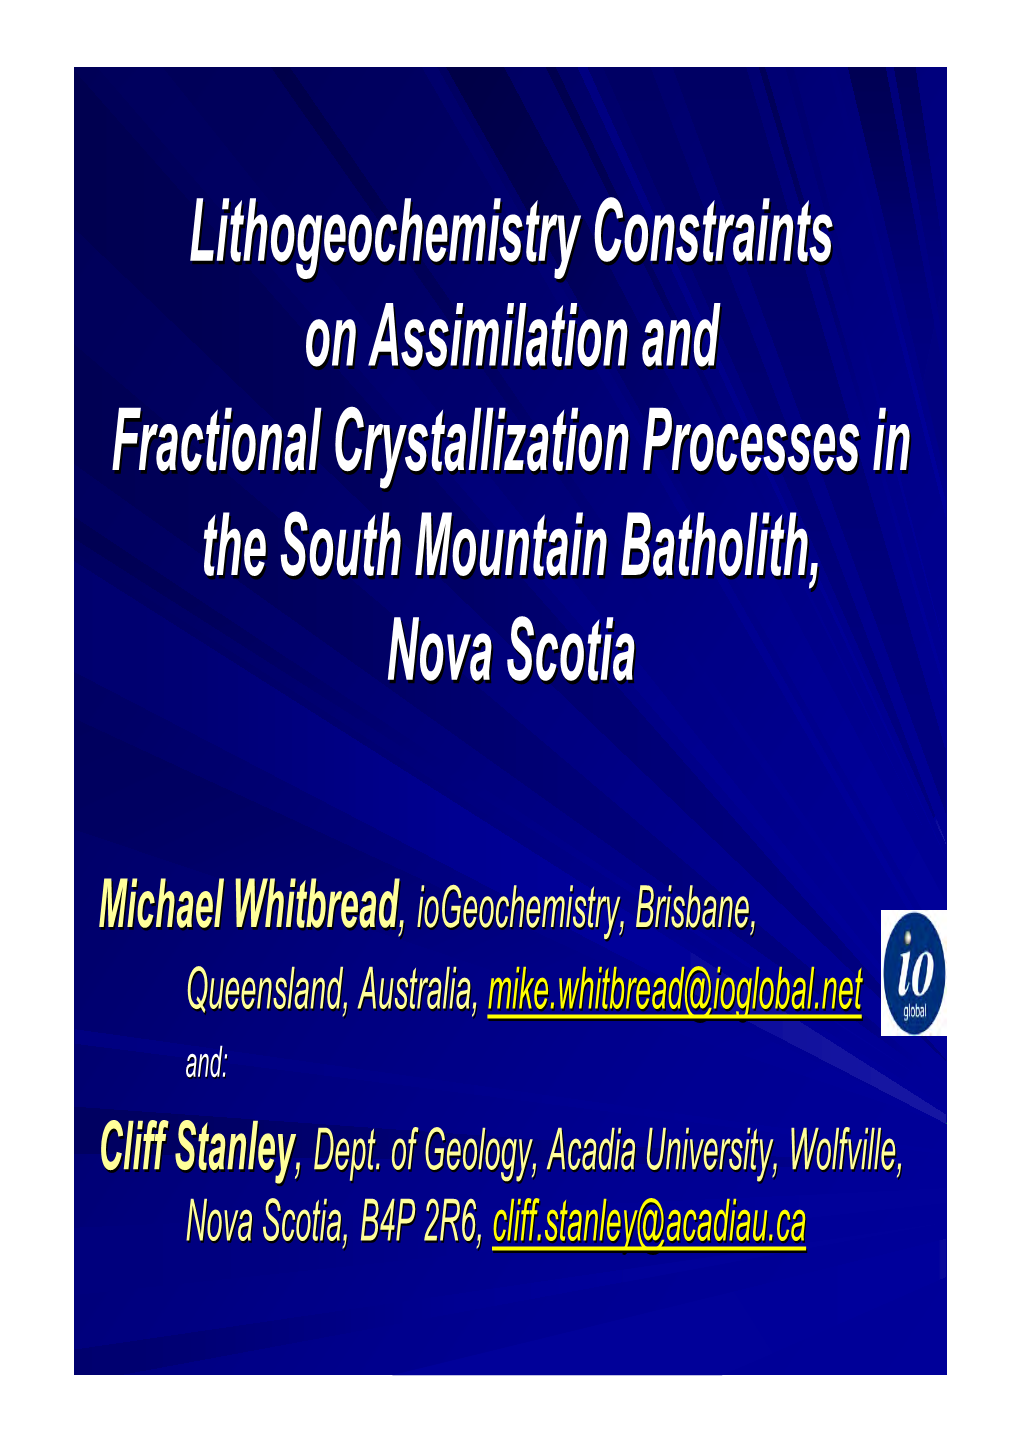 Lithogeochemistry Constraints on Assimilation and Fractional